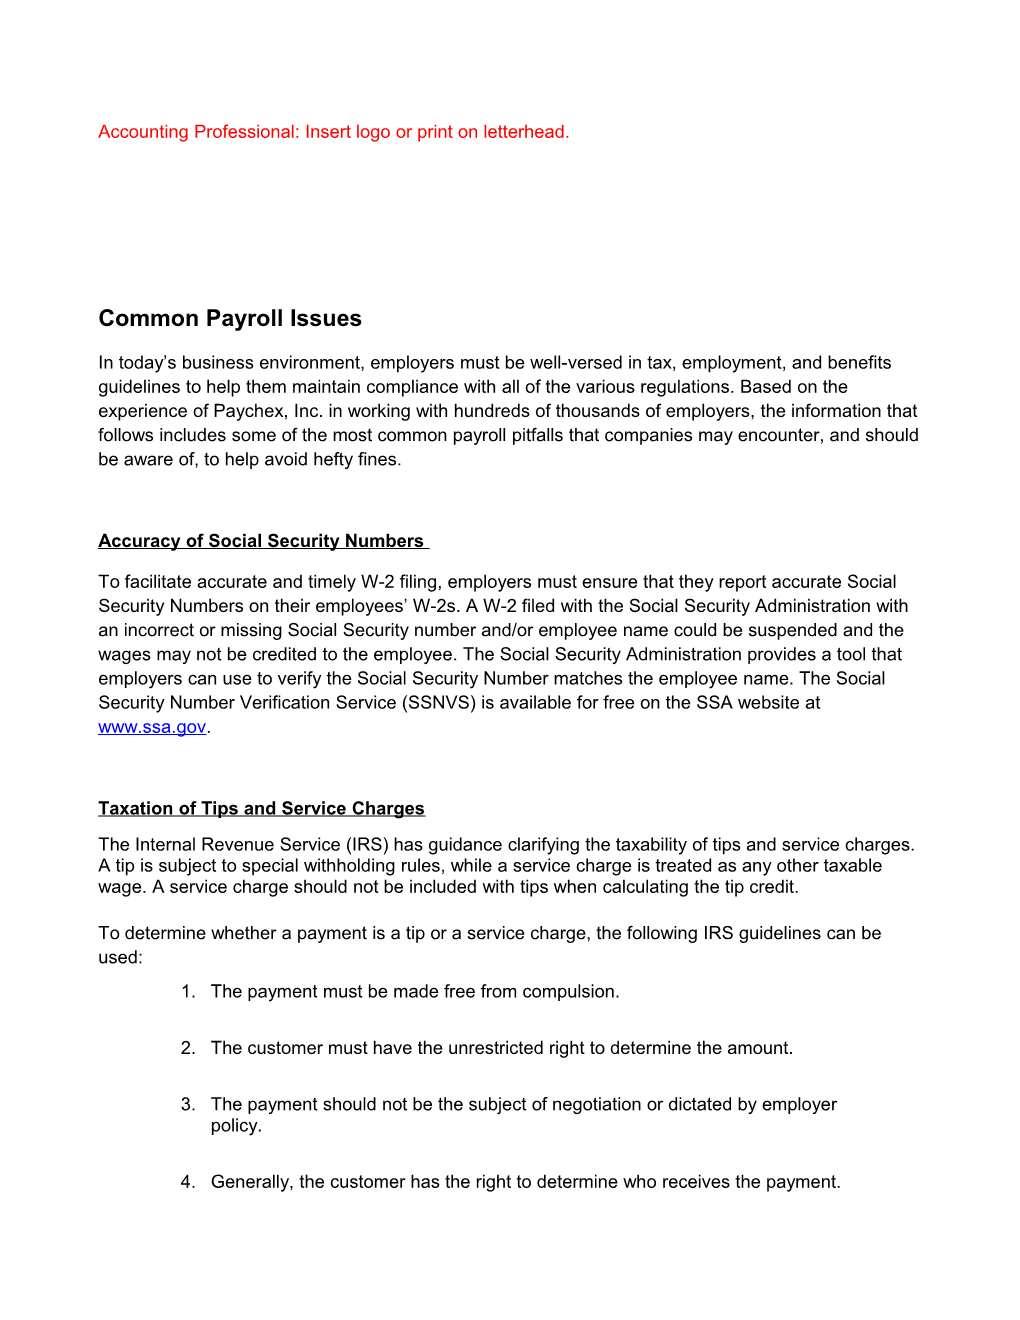 2015 Common Payroll Issues